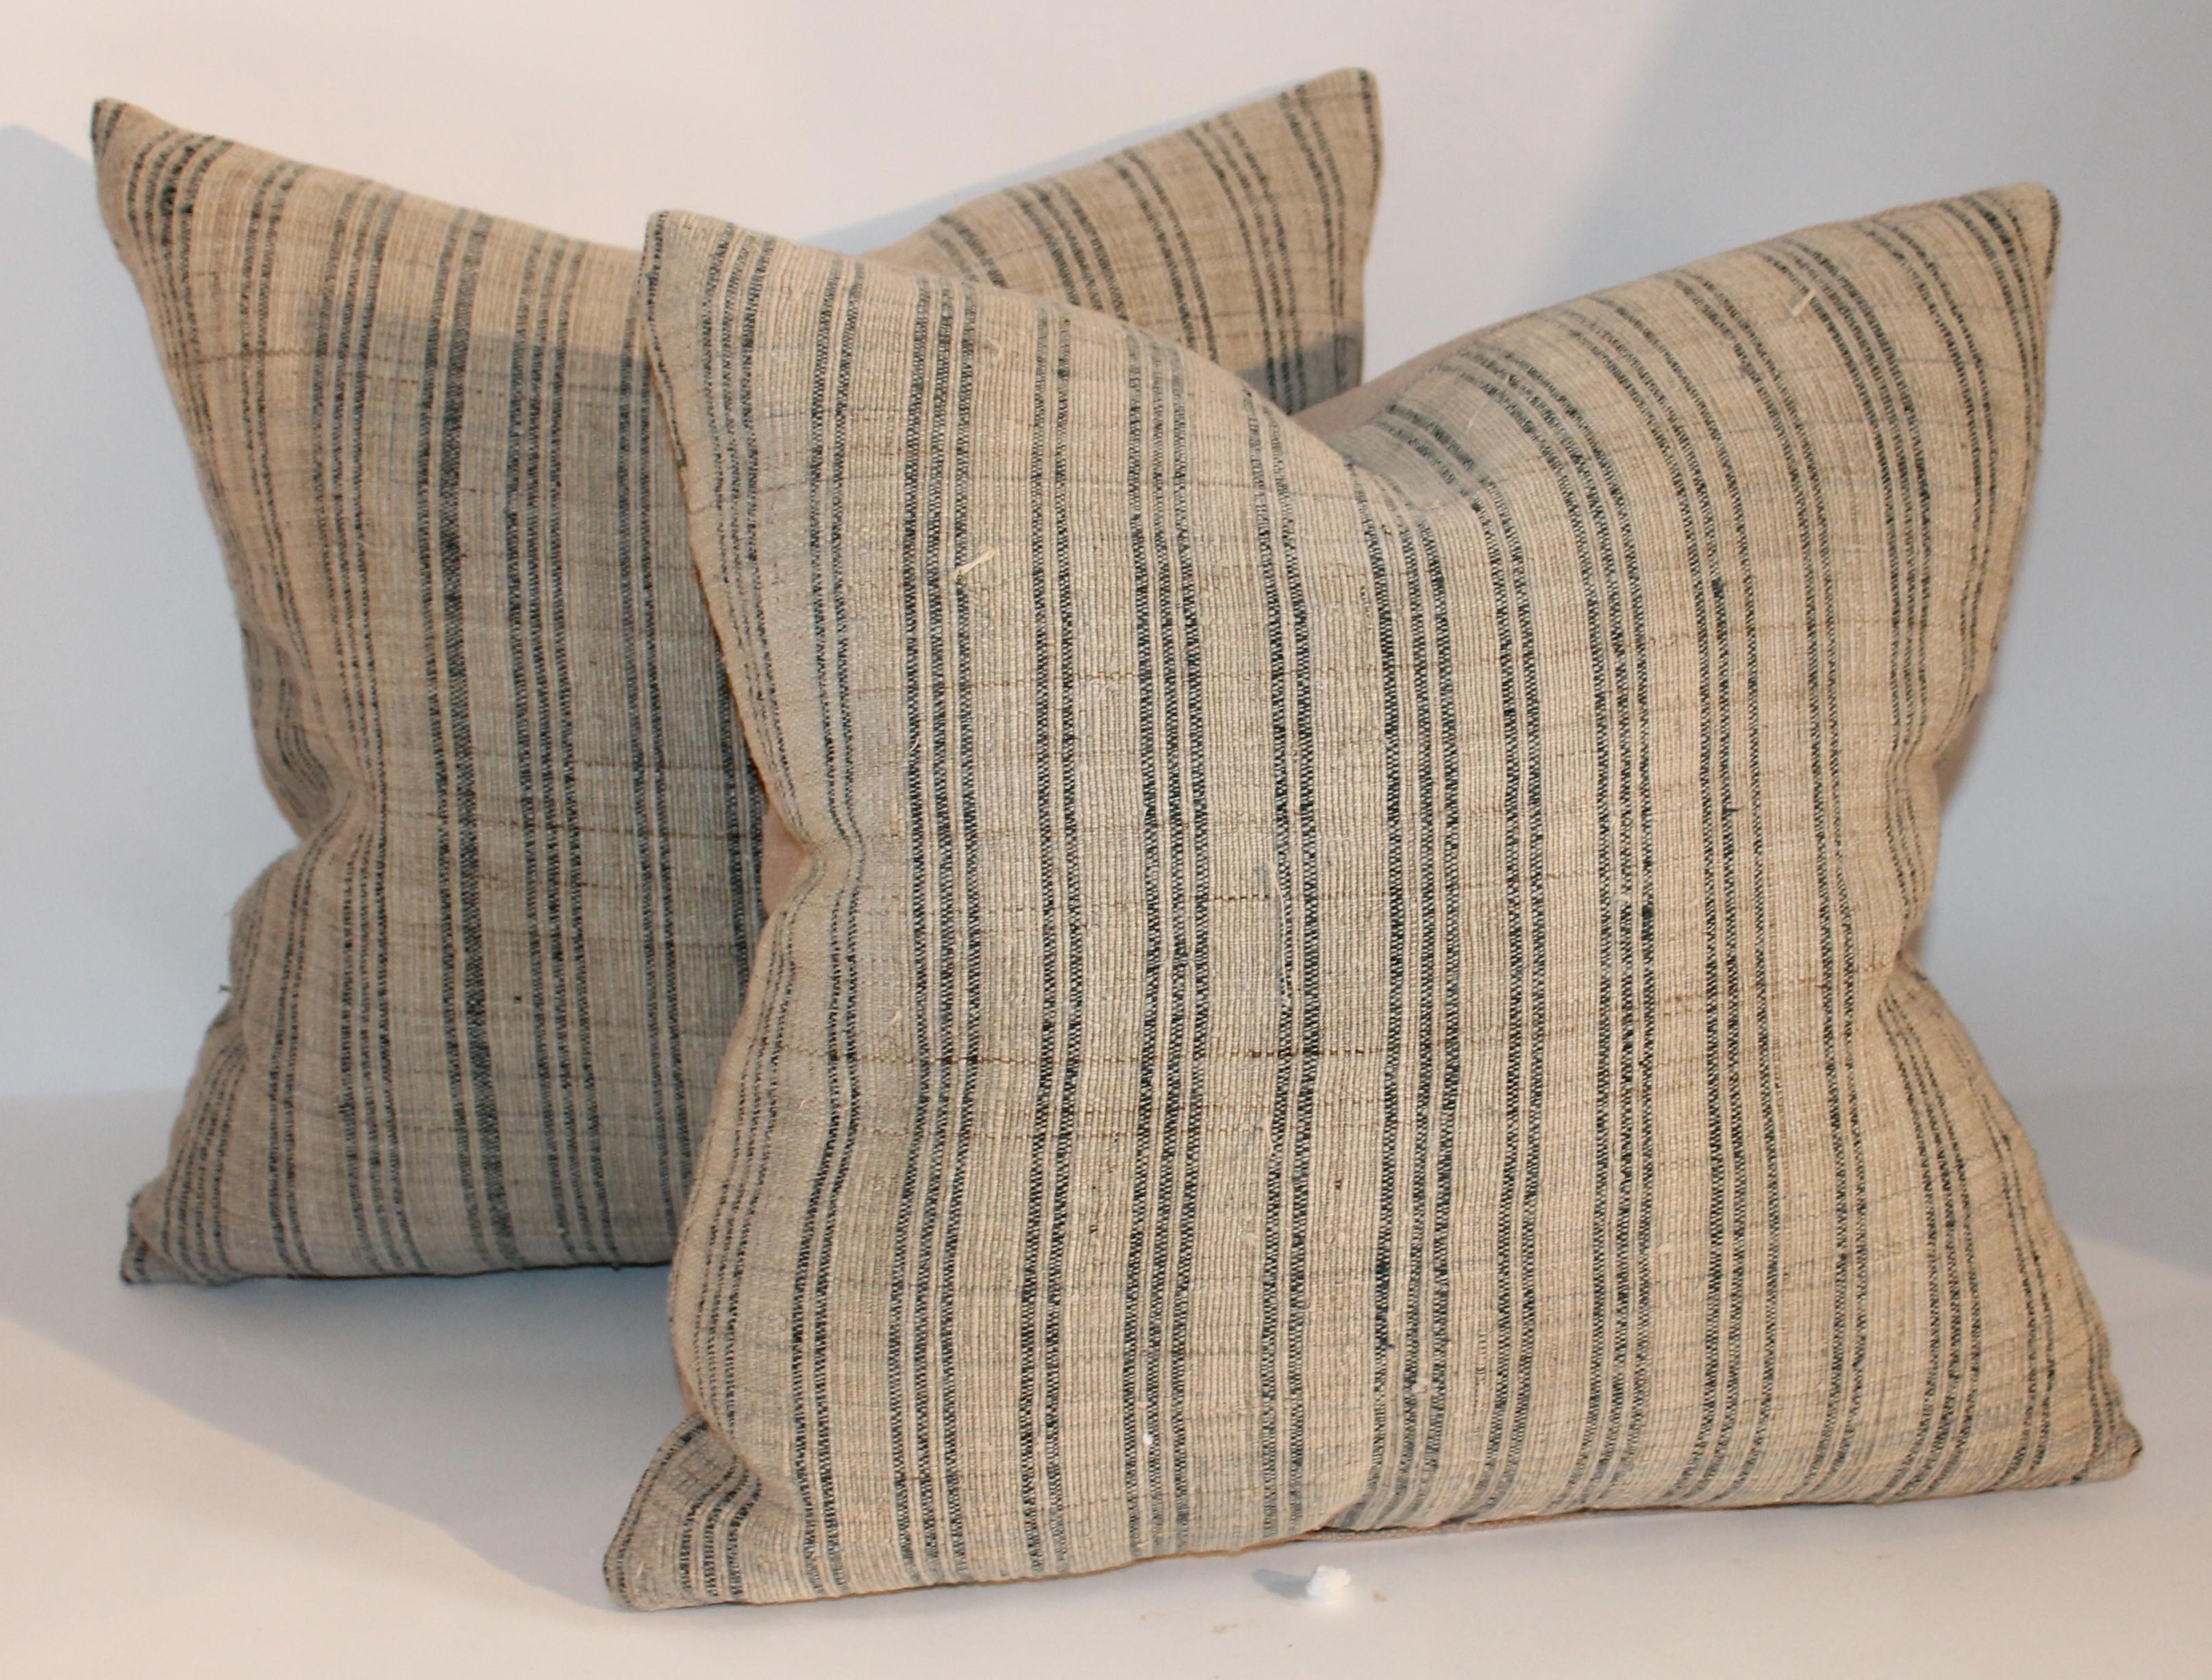 Hand-Crafted 19th Century Linen Ticking Pillows, Pair